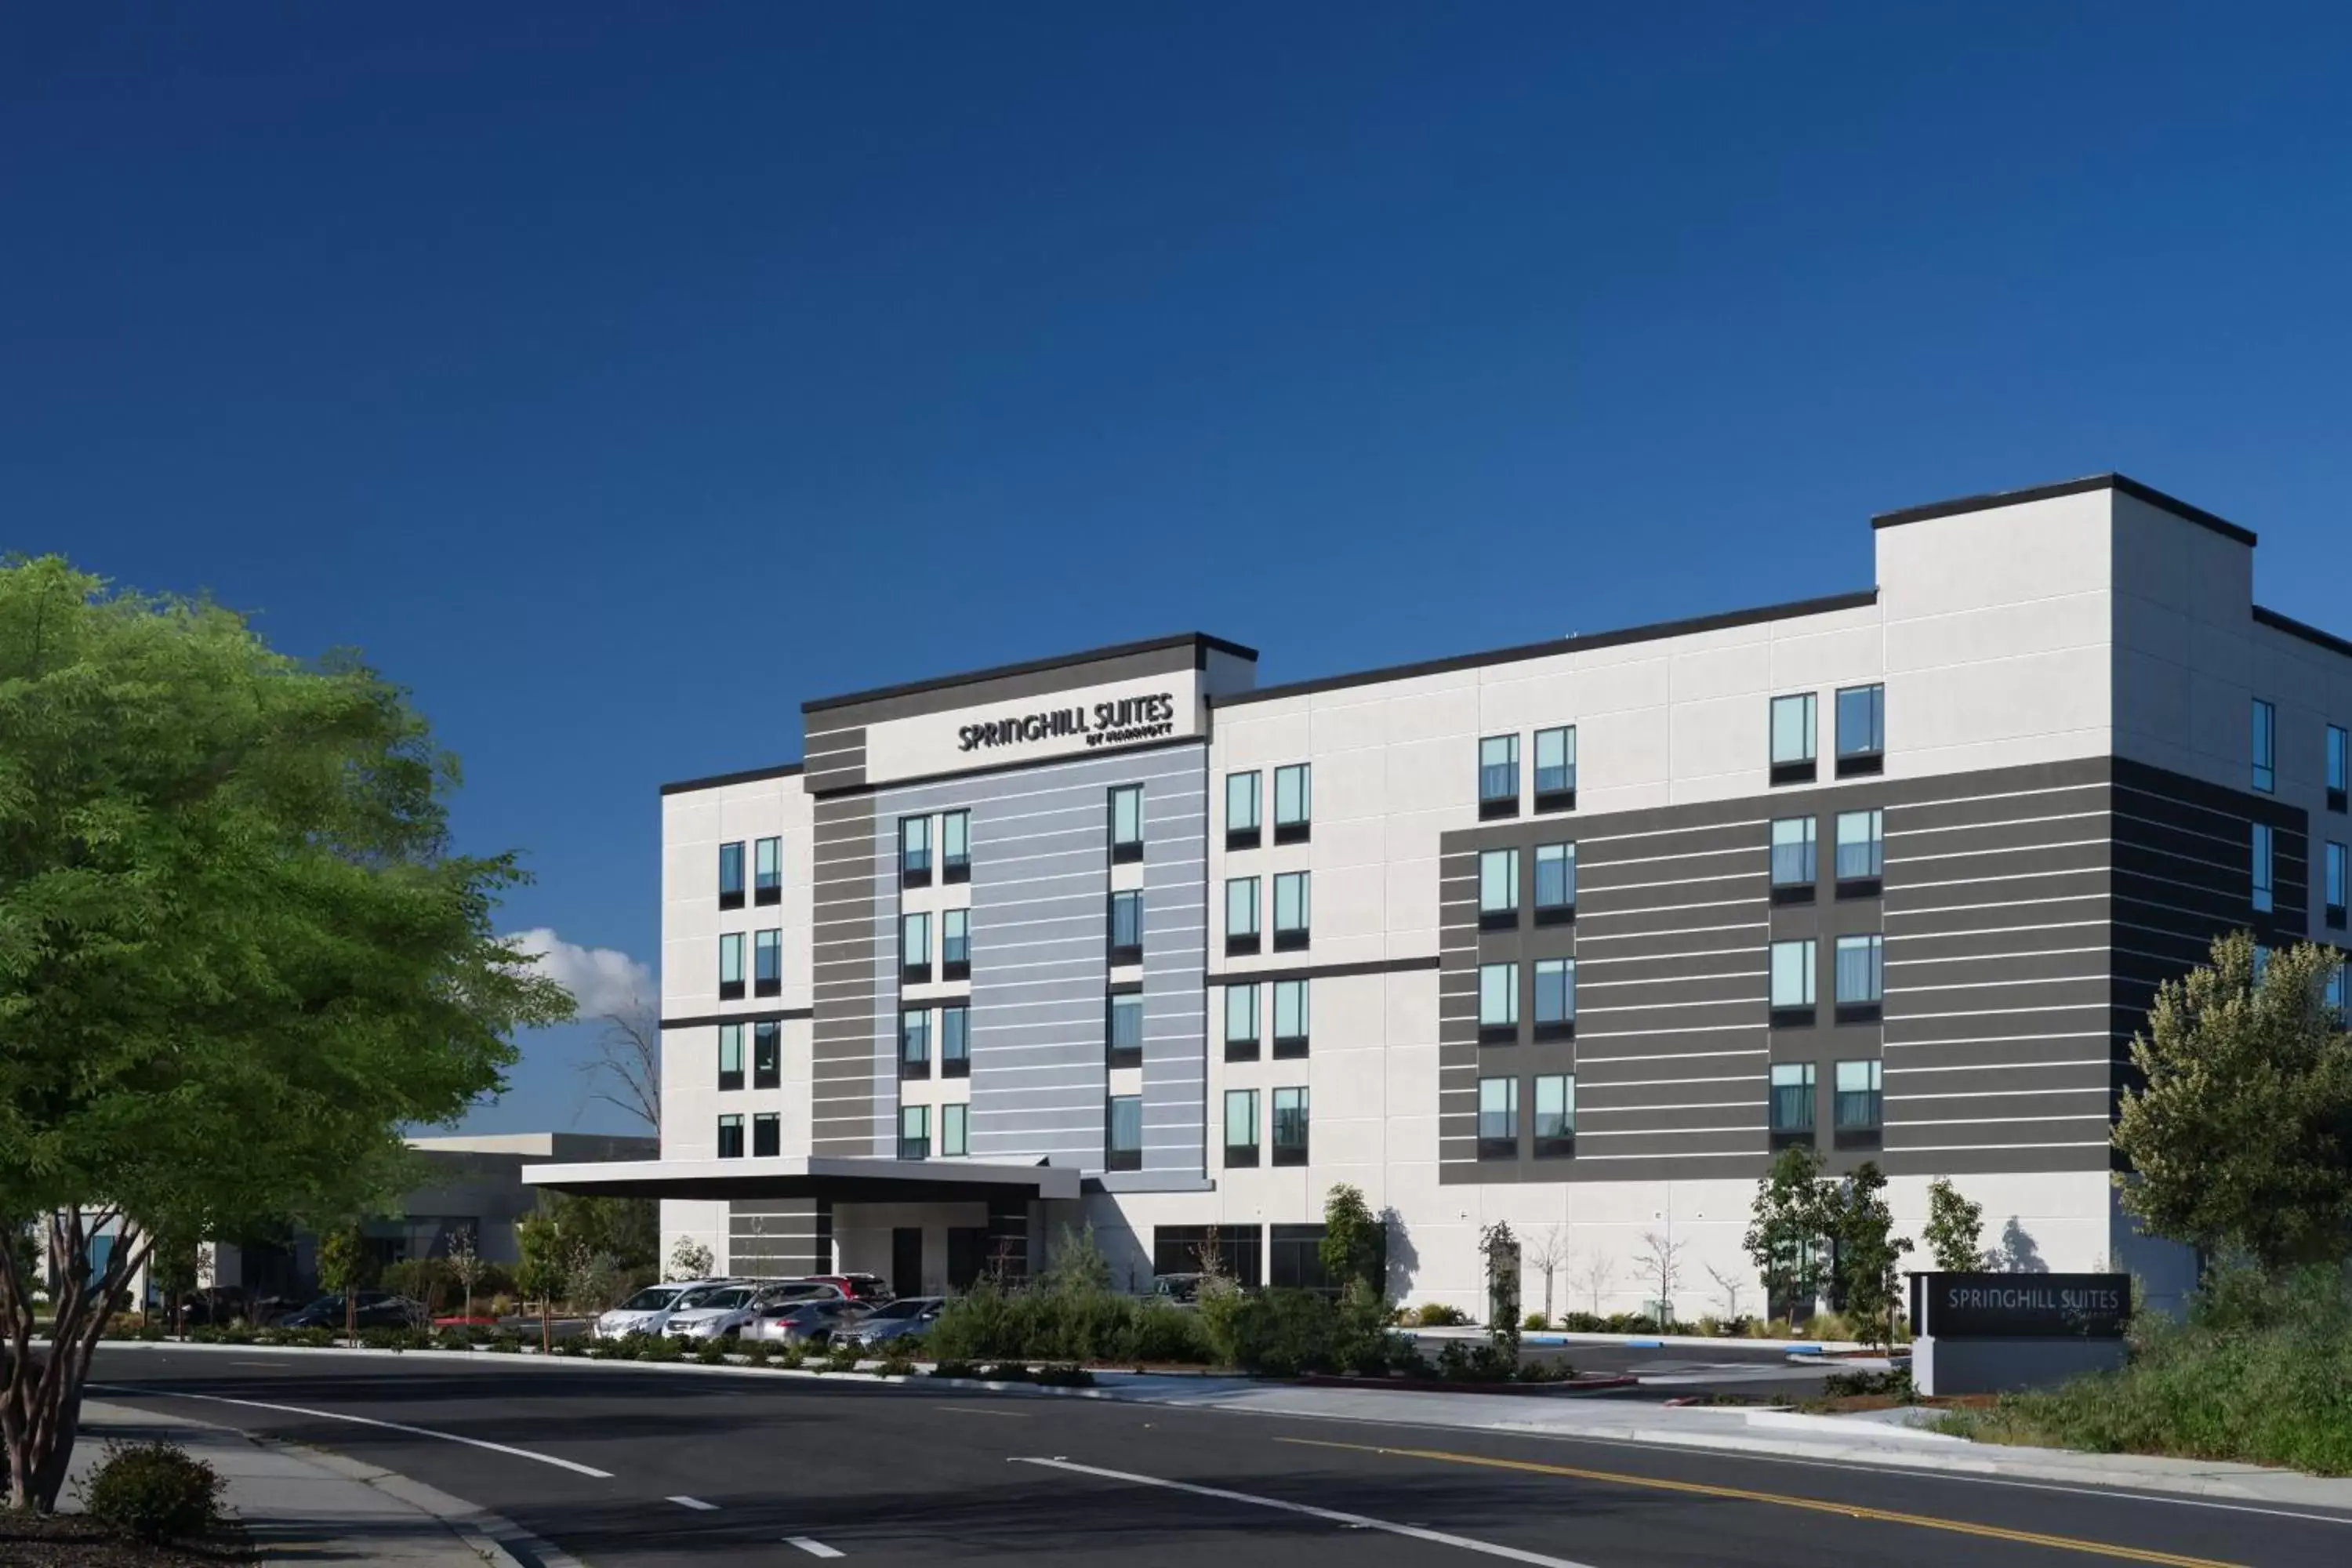 Property Building in SpringHill Suites by Marriott Milpitas Silicon Valley